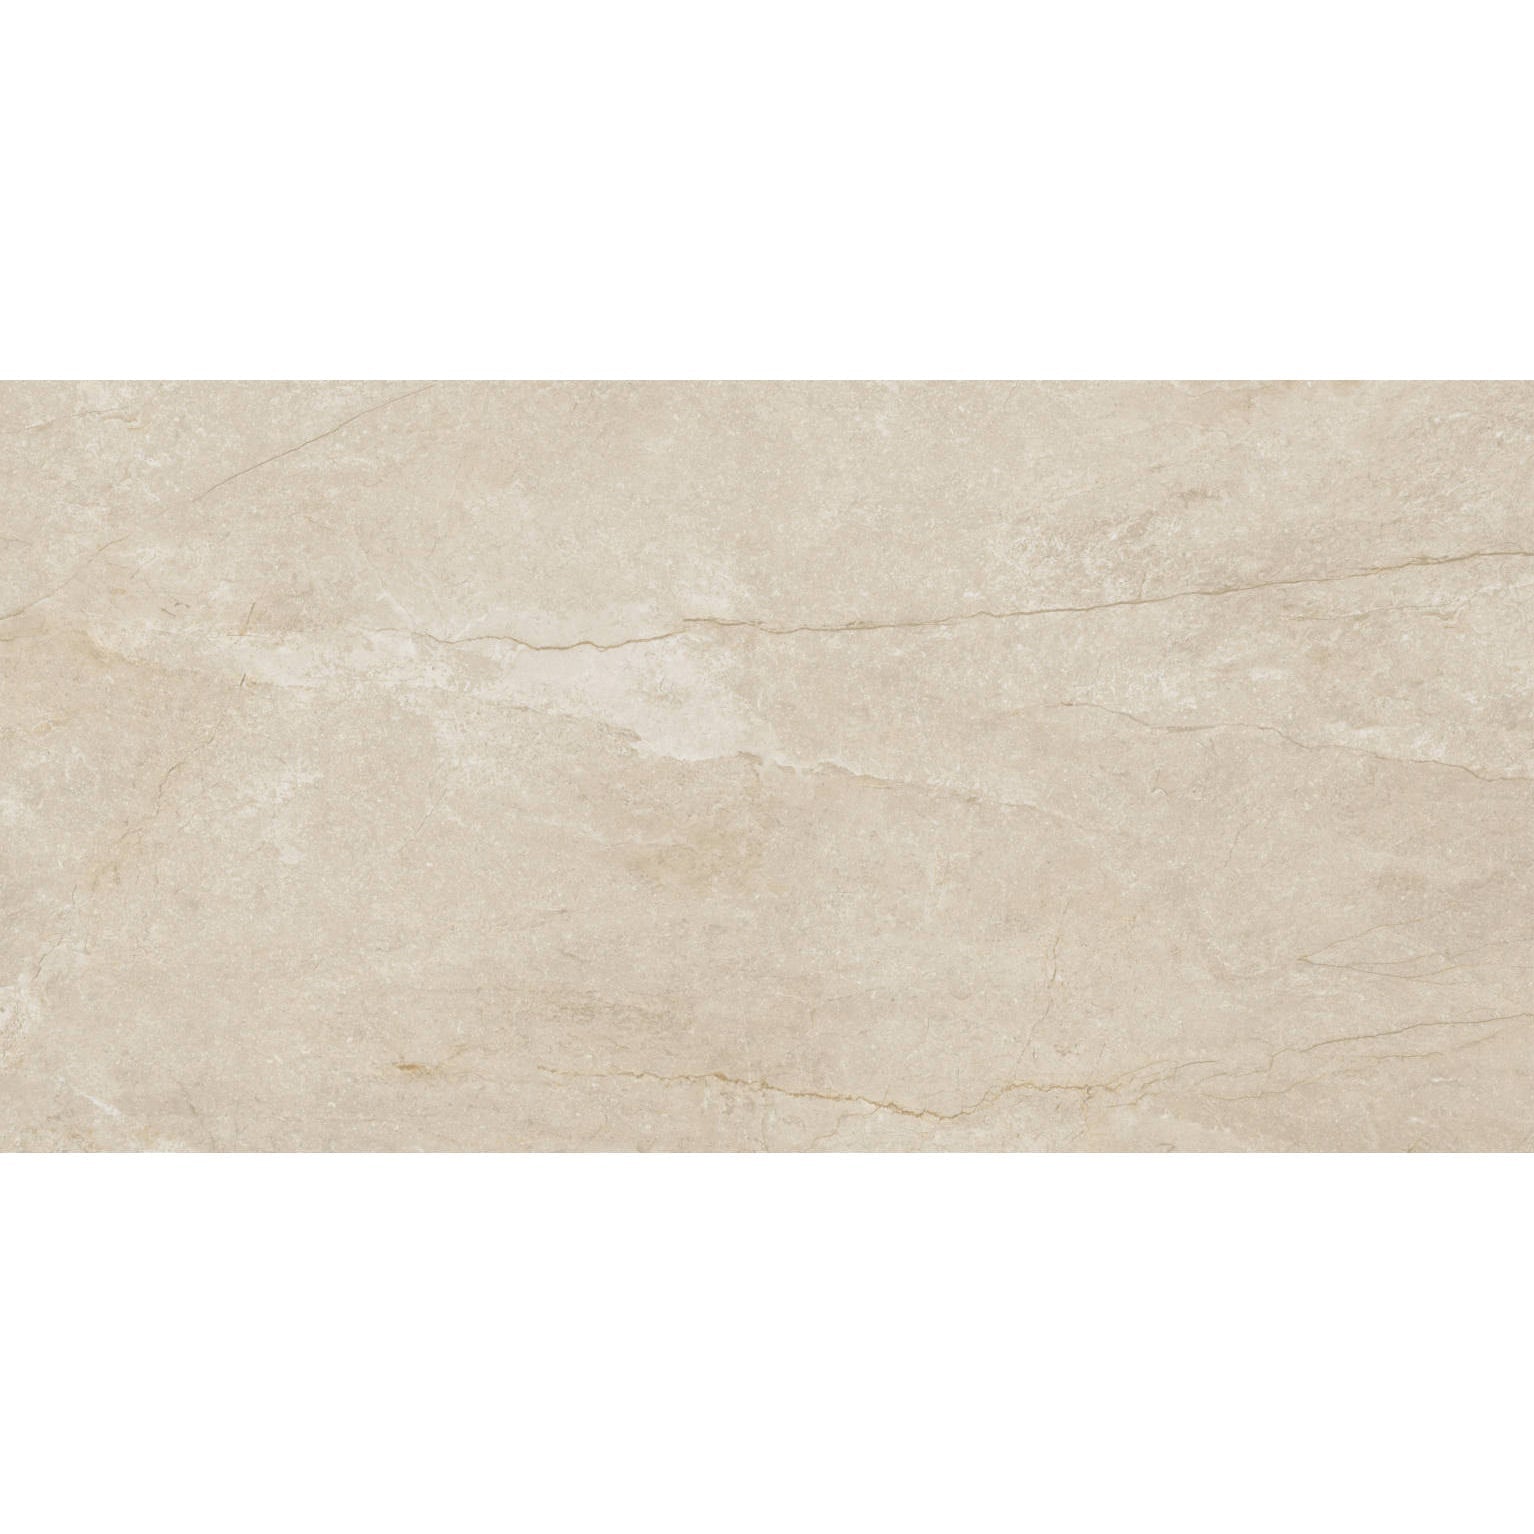 General Ceramic - Wells 12 in. x 24 in. Rectified Porcelain Tile - Cream Polished